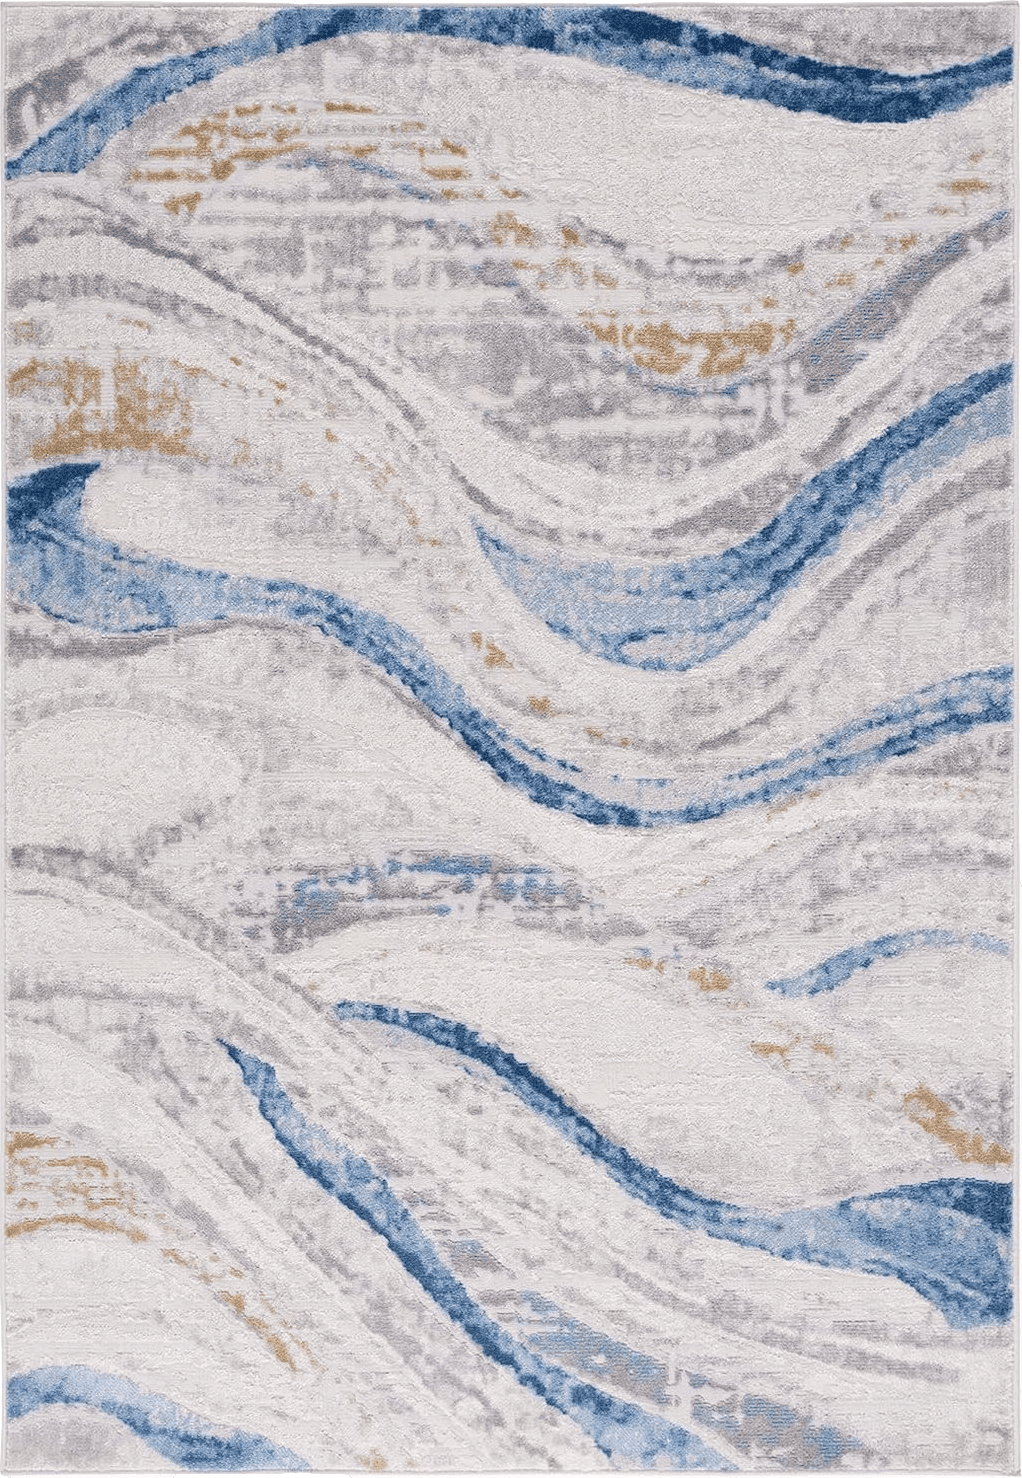 Area 9x12 Safavieh Palma Collection Area Rug - 9' x 12', Beige & Light Blue, Modern Abstract Design, Non-Shedding & Easy Care, Ideal for High Traffic Areas in Living Room, Bedroom (PAM334A)